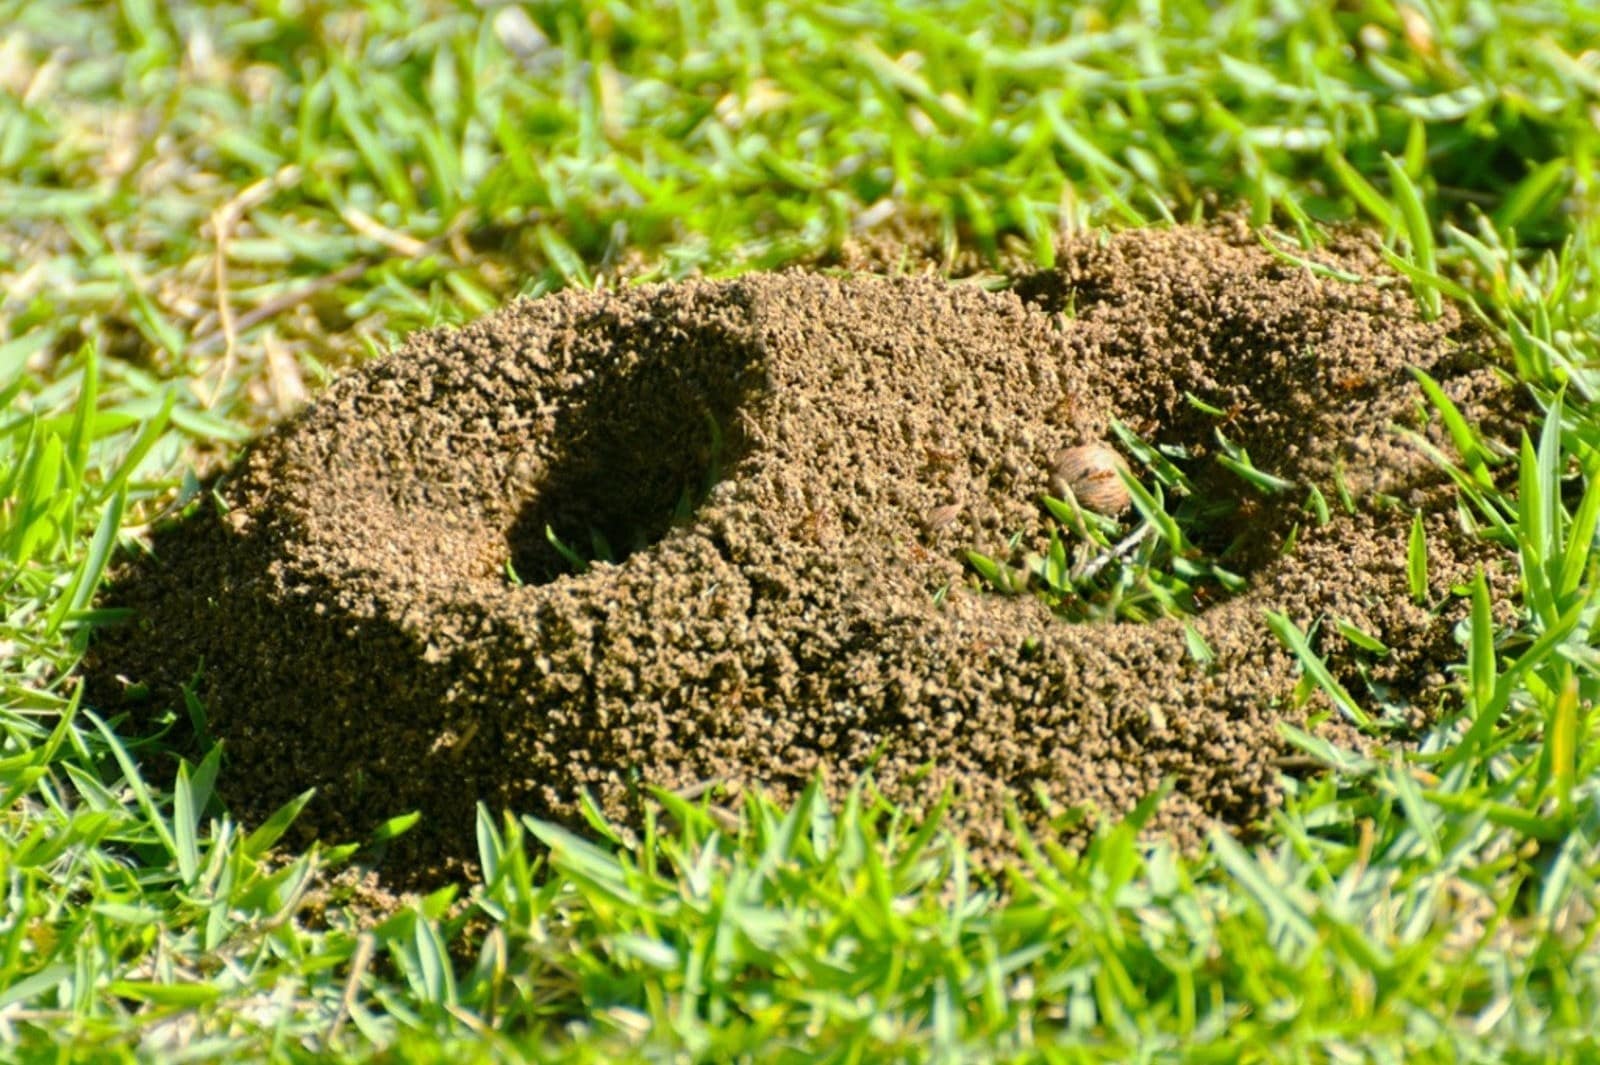 How To Kill Ants In Yard Without Killing Grass